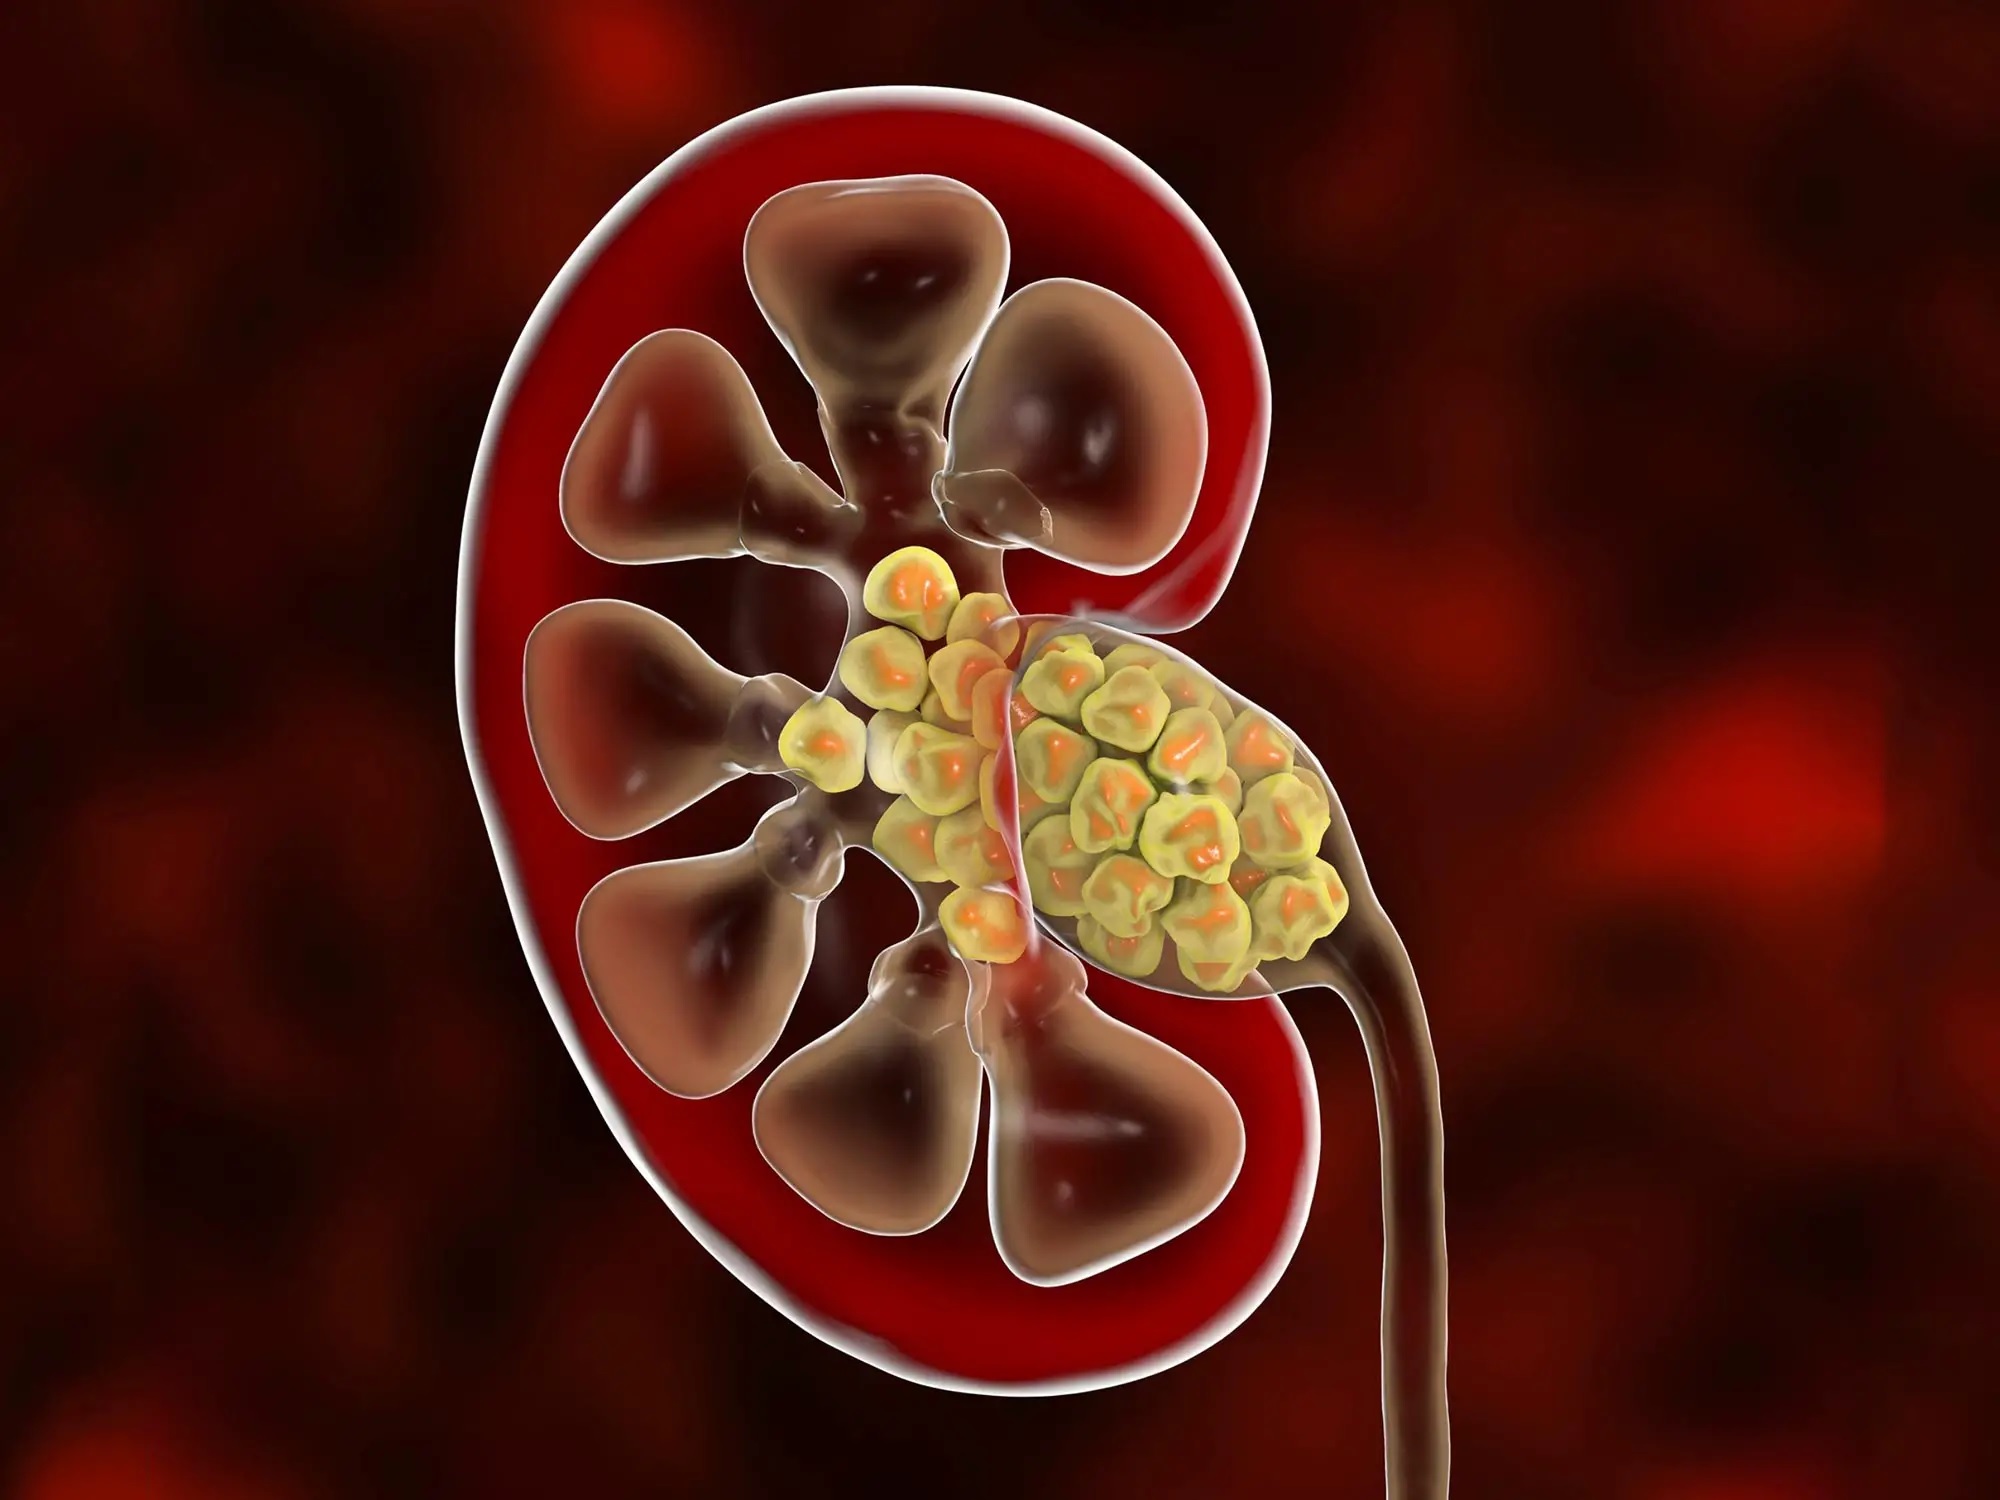 How to Manage Pain During a Kidney Stone Attack